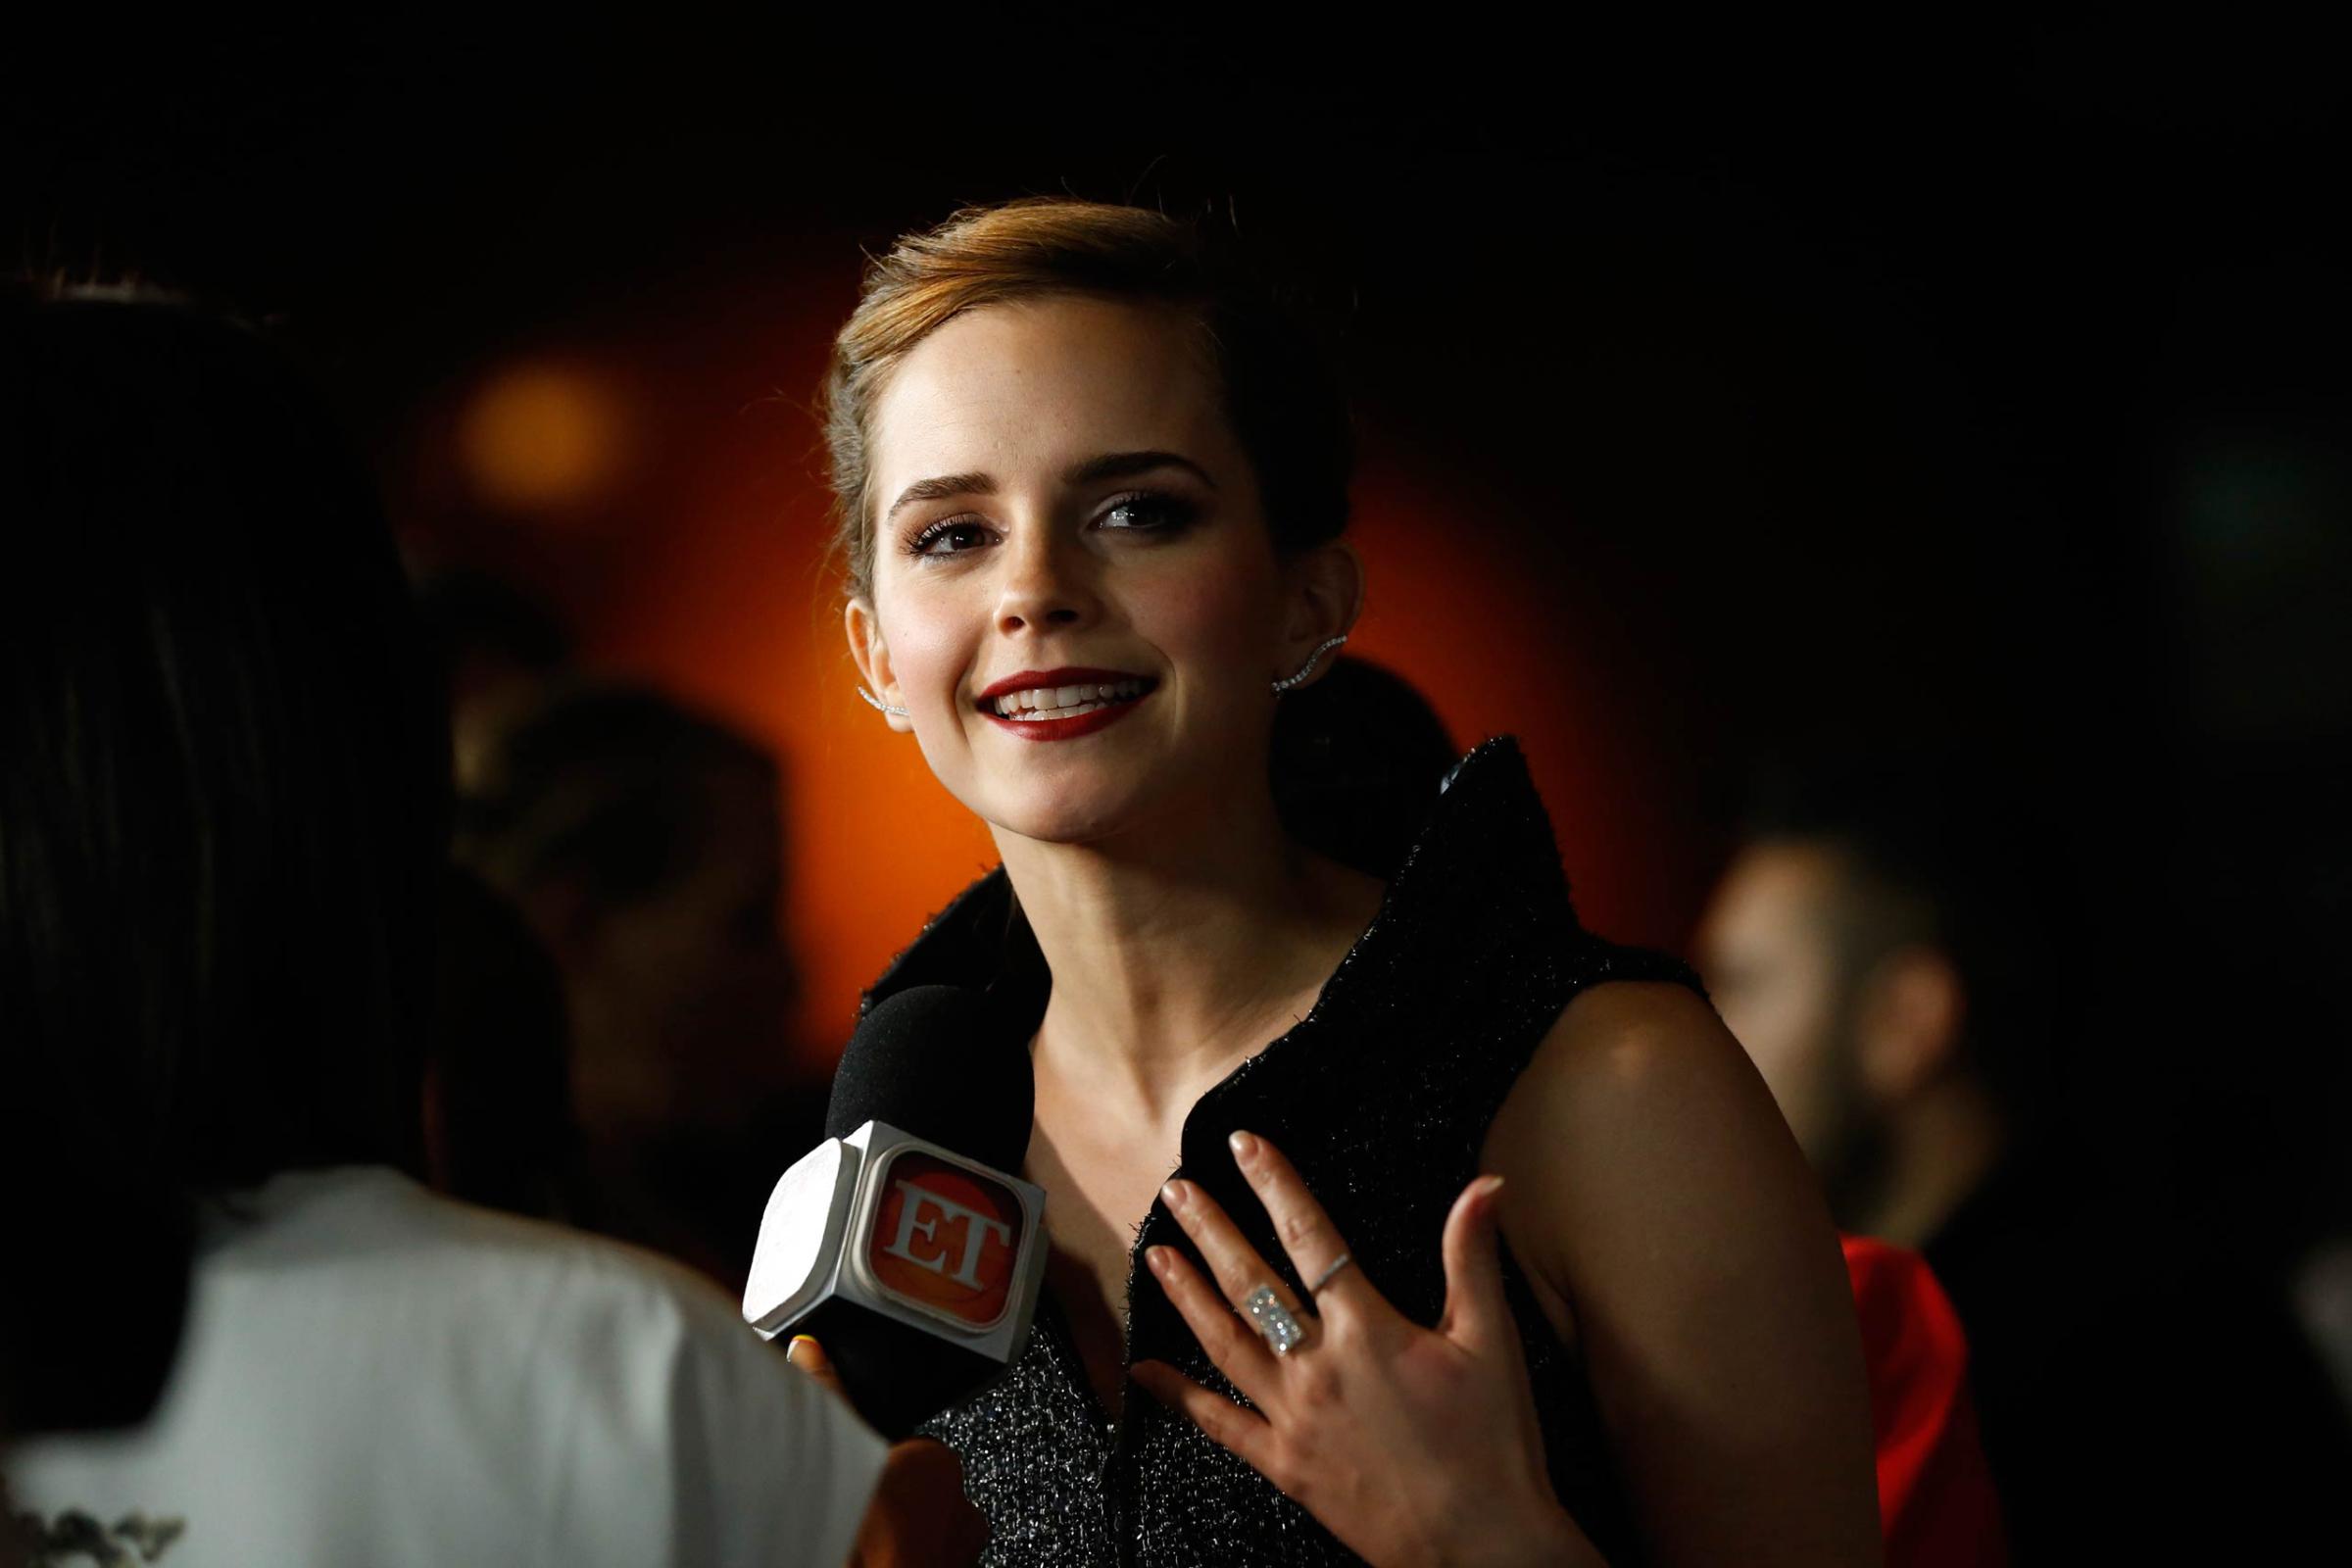 Watson is interviewed at the premiere of "The Bling Ring" at the Director's Guild of America (DGA) theatre in Los Angeles